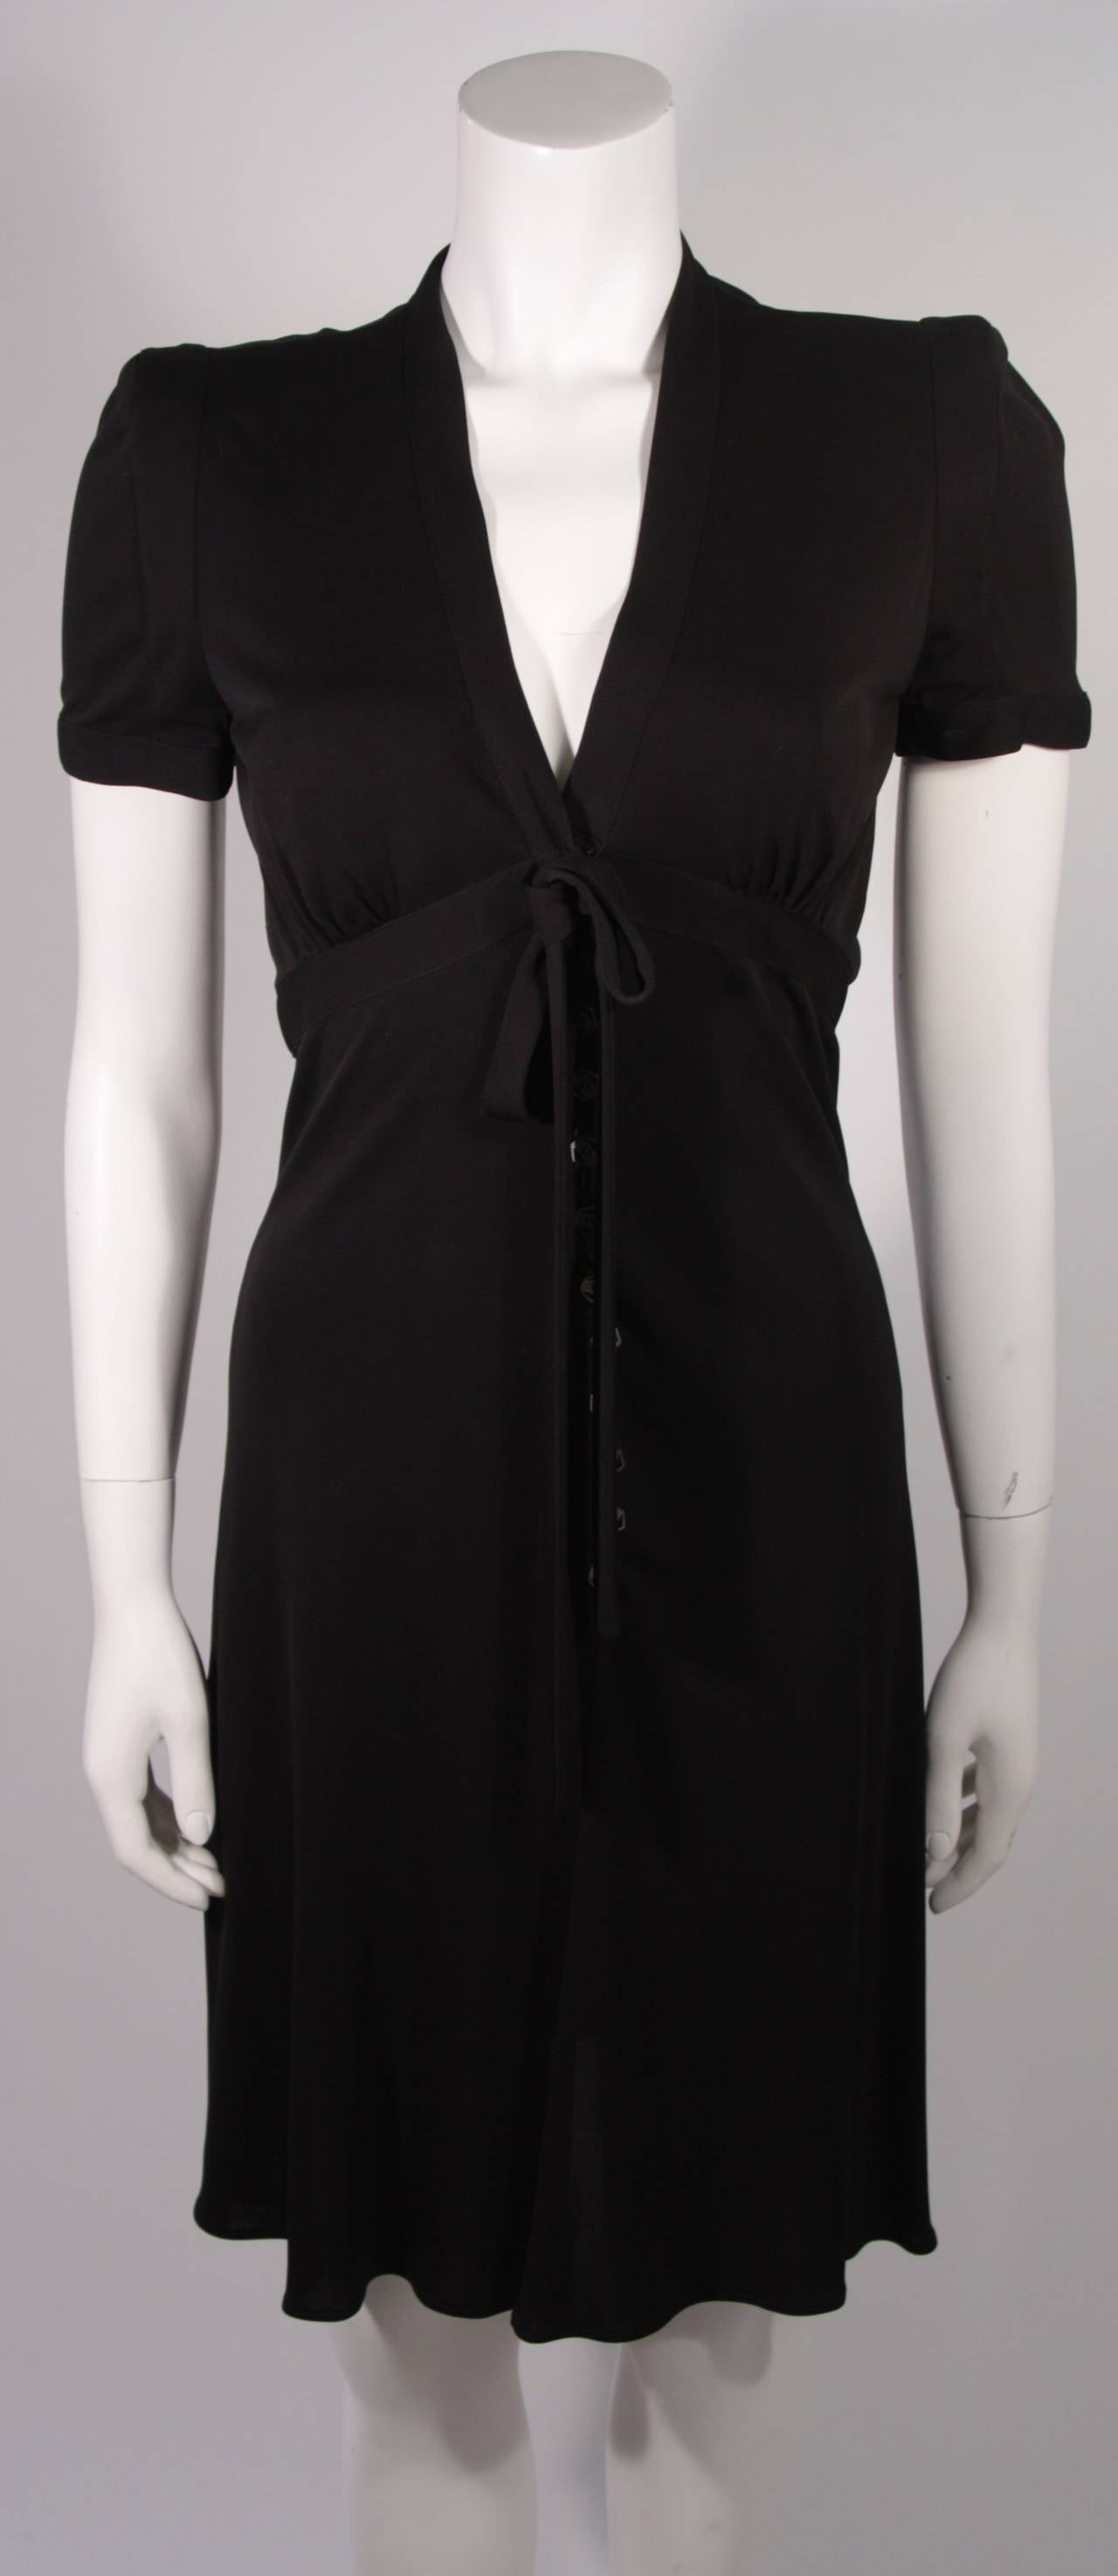 Lagerfield Black Jersey Dress and Jacket Ensemble Size 36 For Sale 2